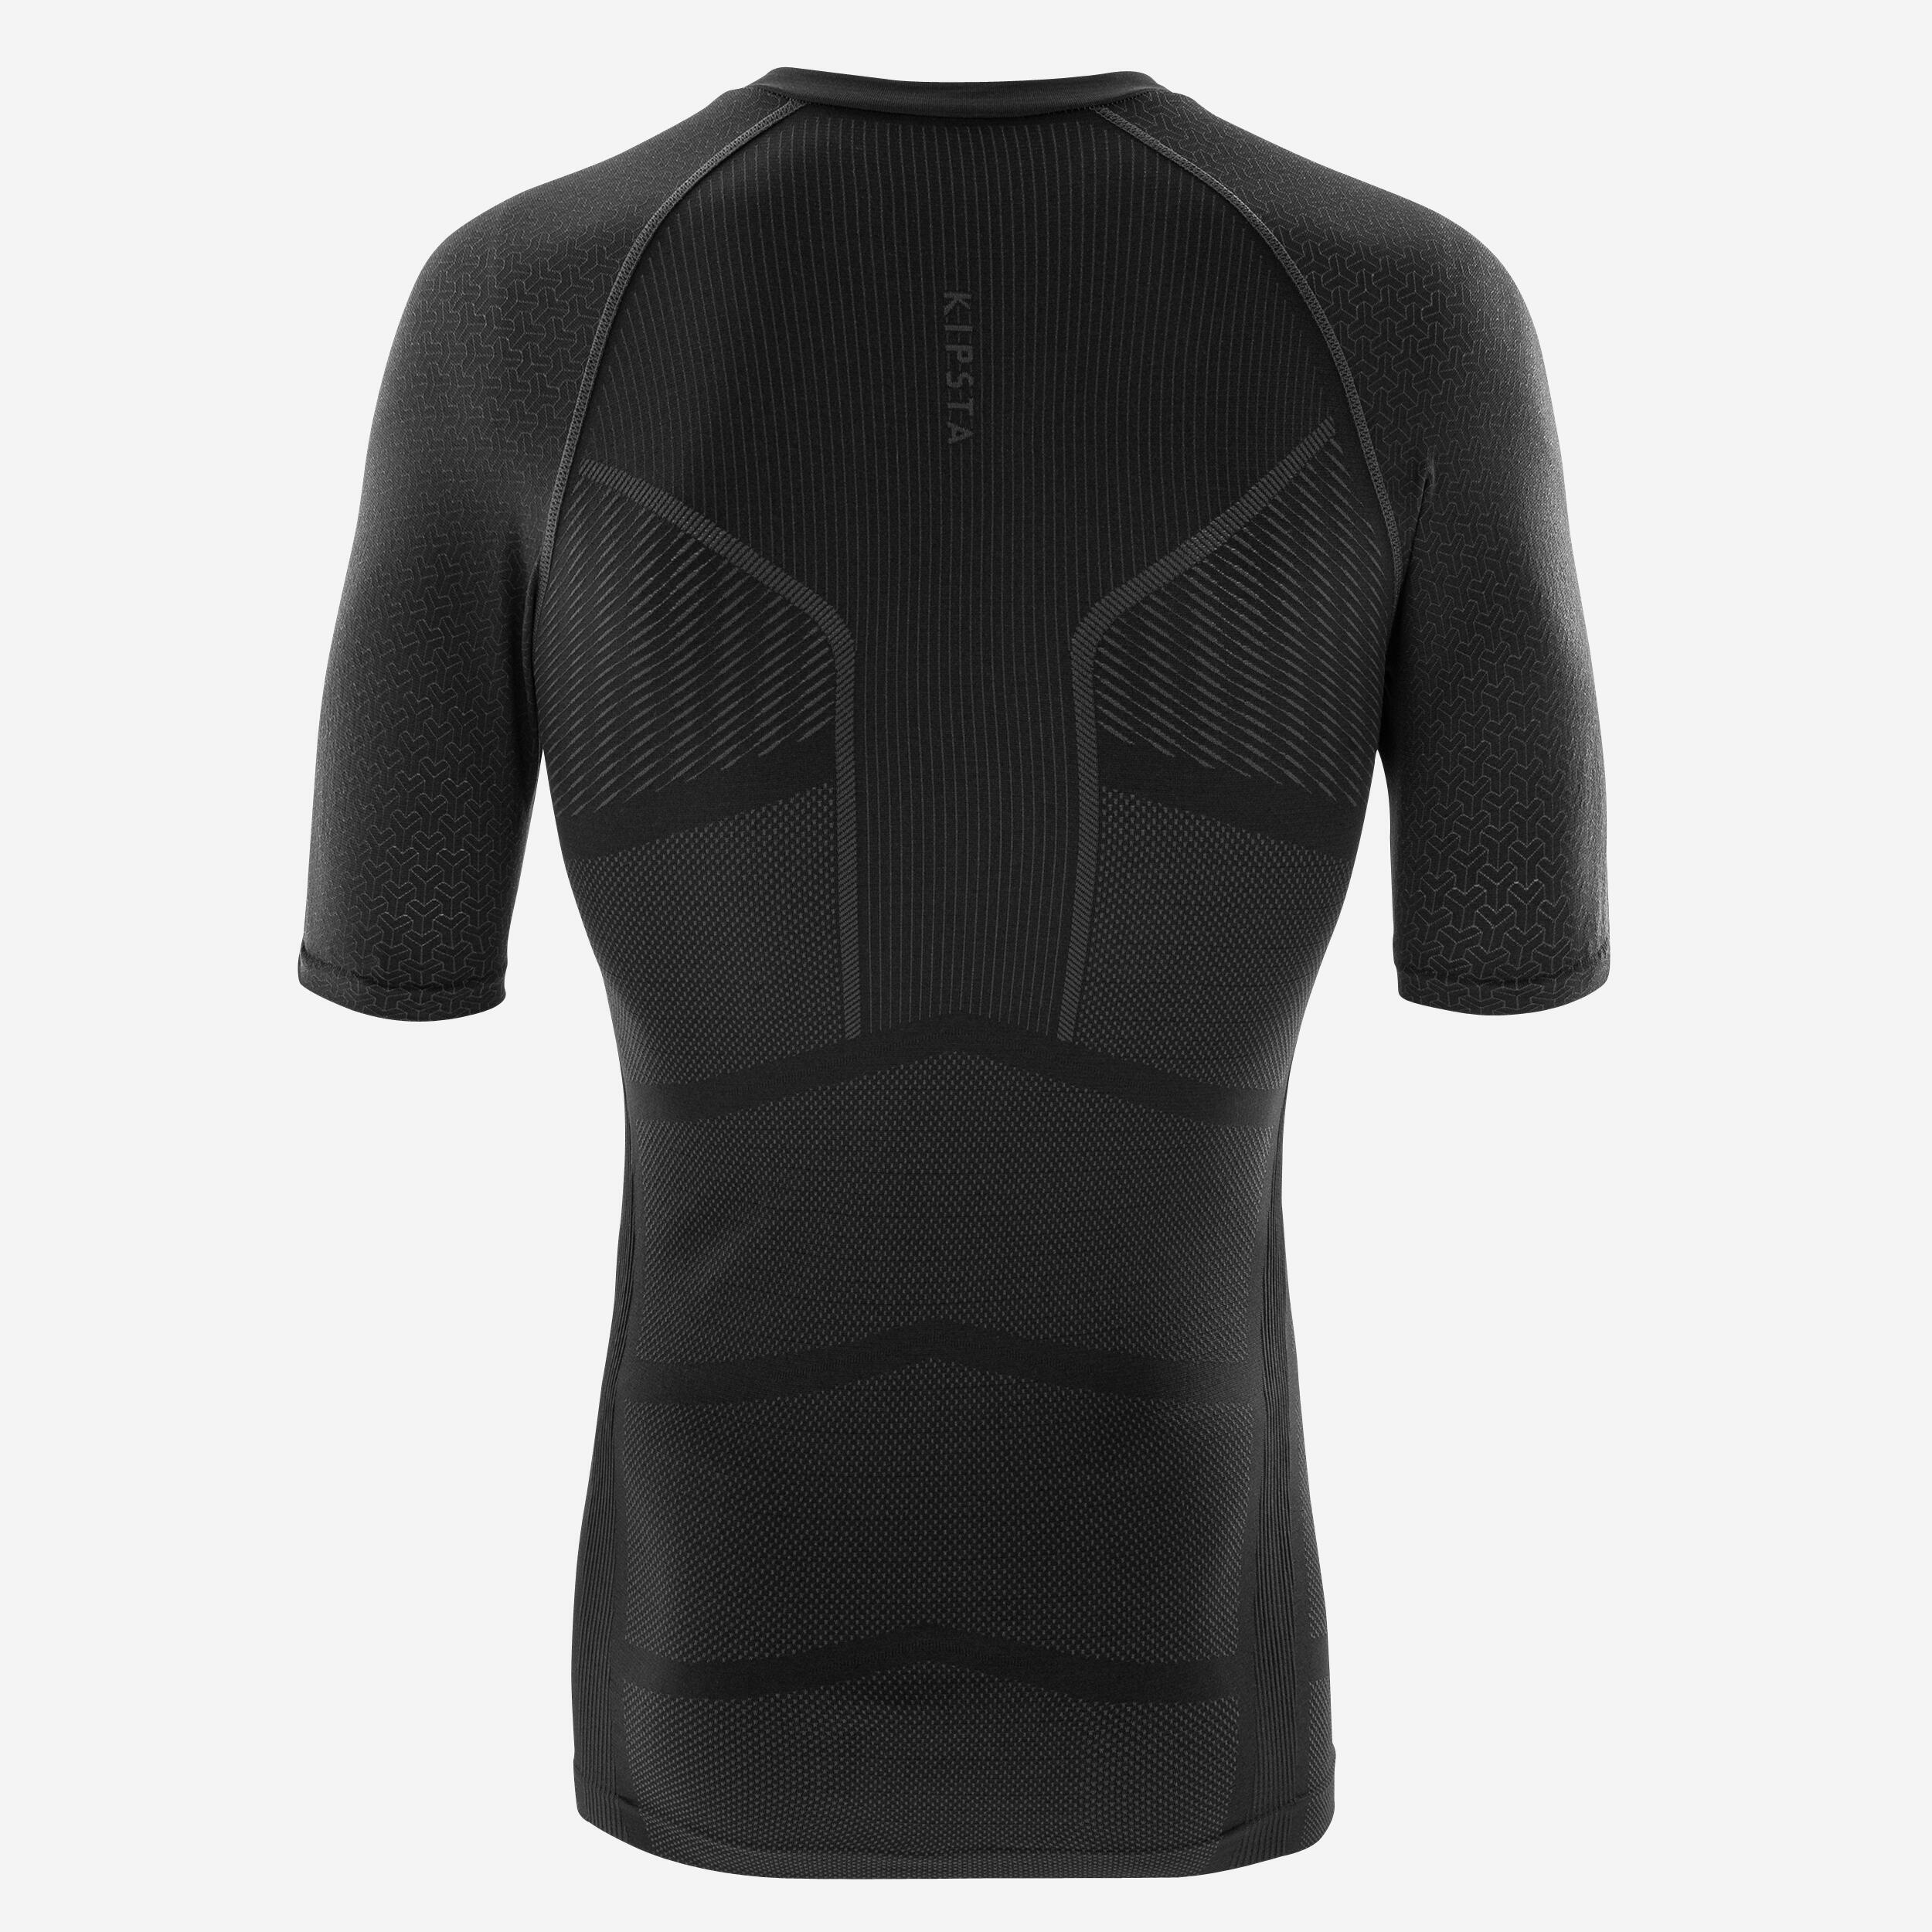 Adult Short-Sleeved Thermal Base Layer Top Keepdry 500 - Black 4/6